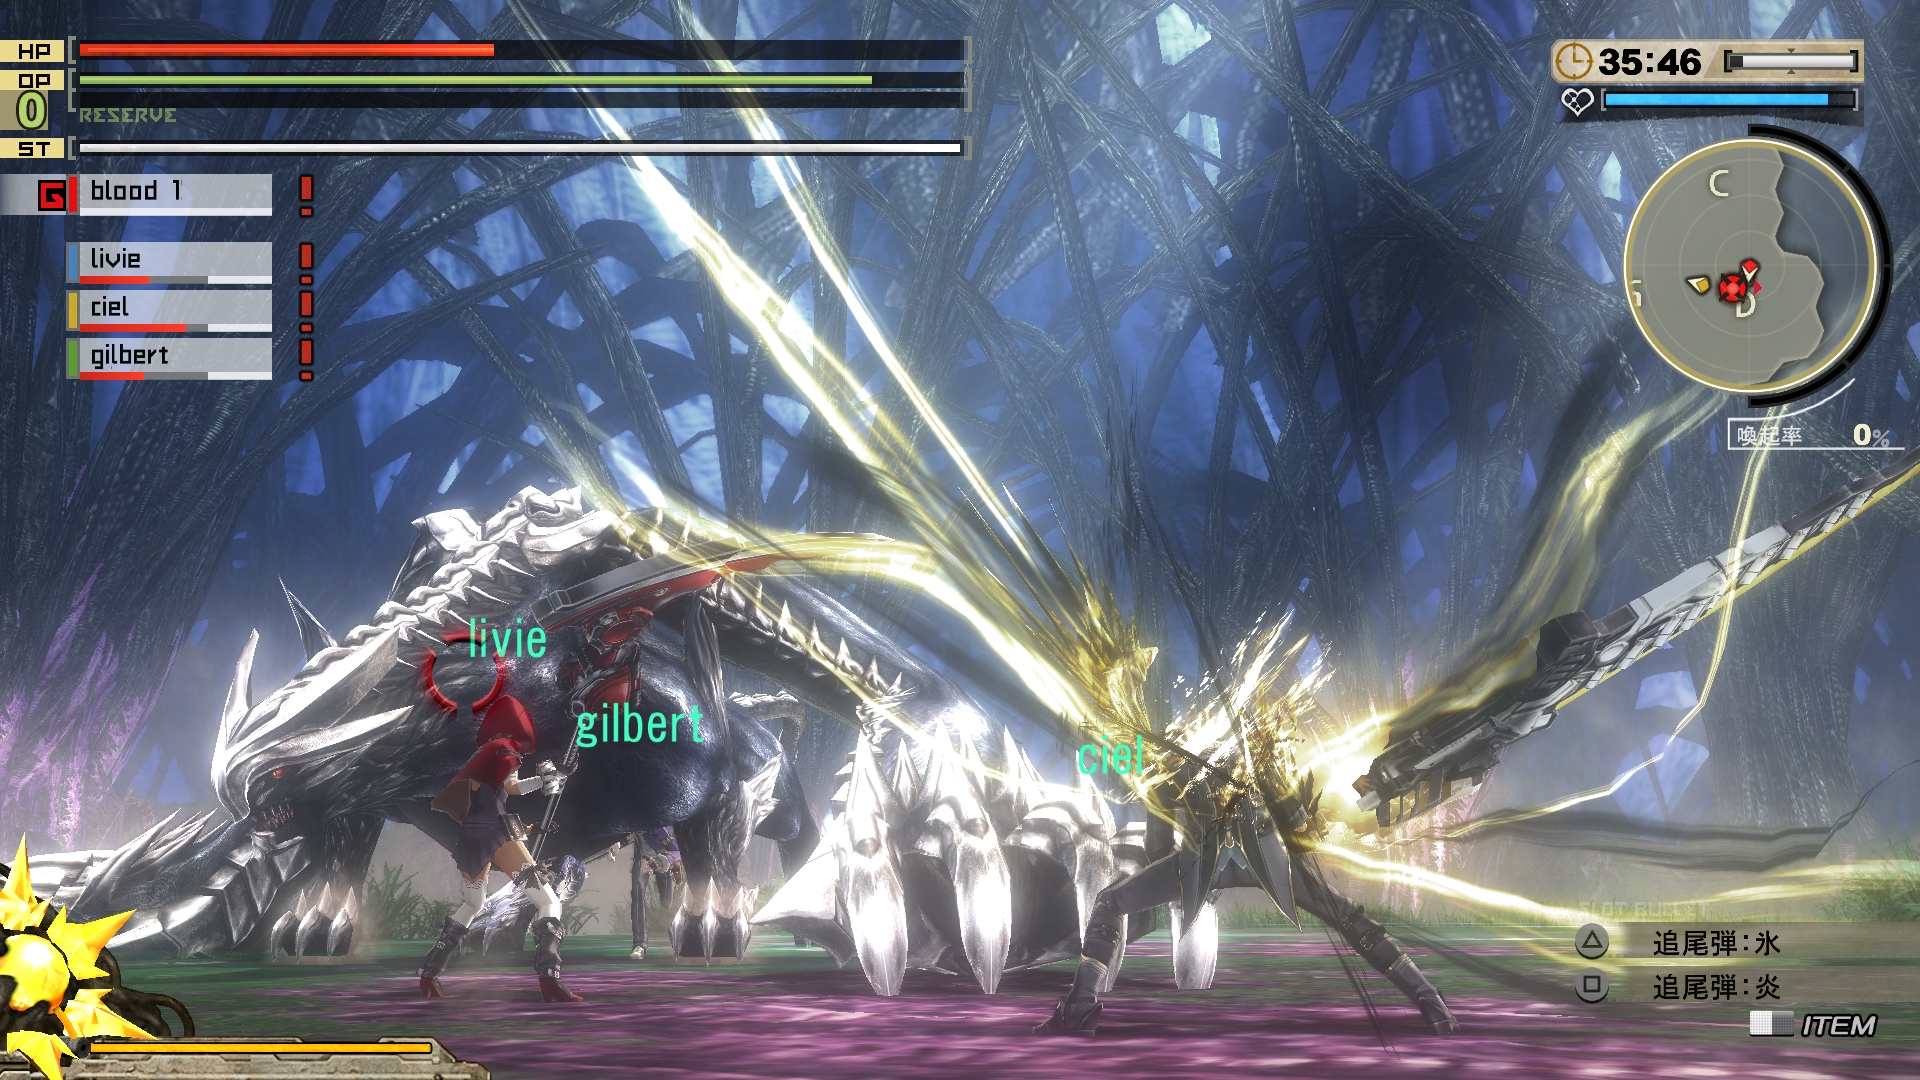 God Eater 2 Rage Burst Pics, Video Game Collection